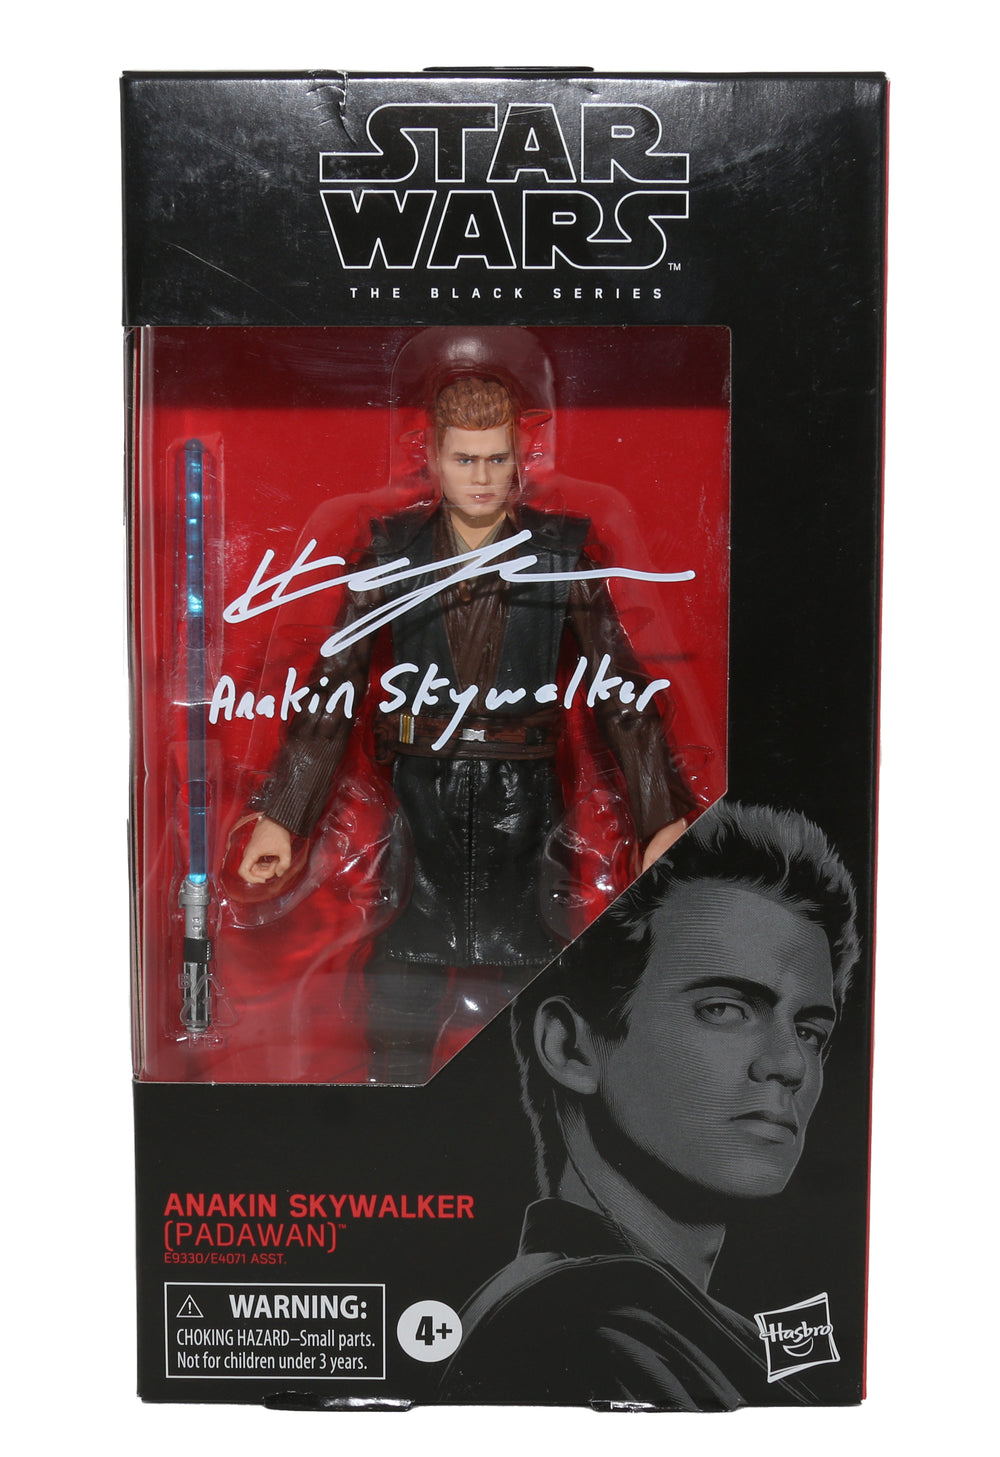 Hayden Christensen as Anakin Skywalker from Star Wars Episode II: Attack of the Clones (SWAU) Black Series Figure Signed with Character Name